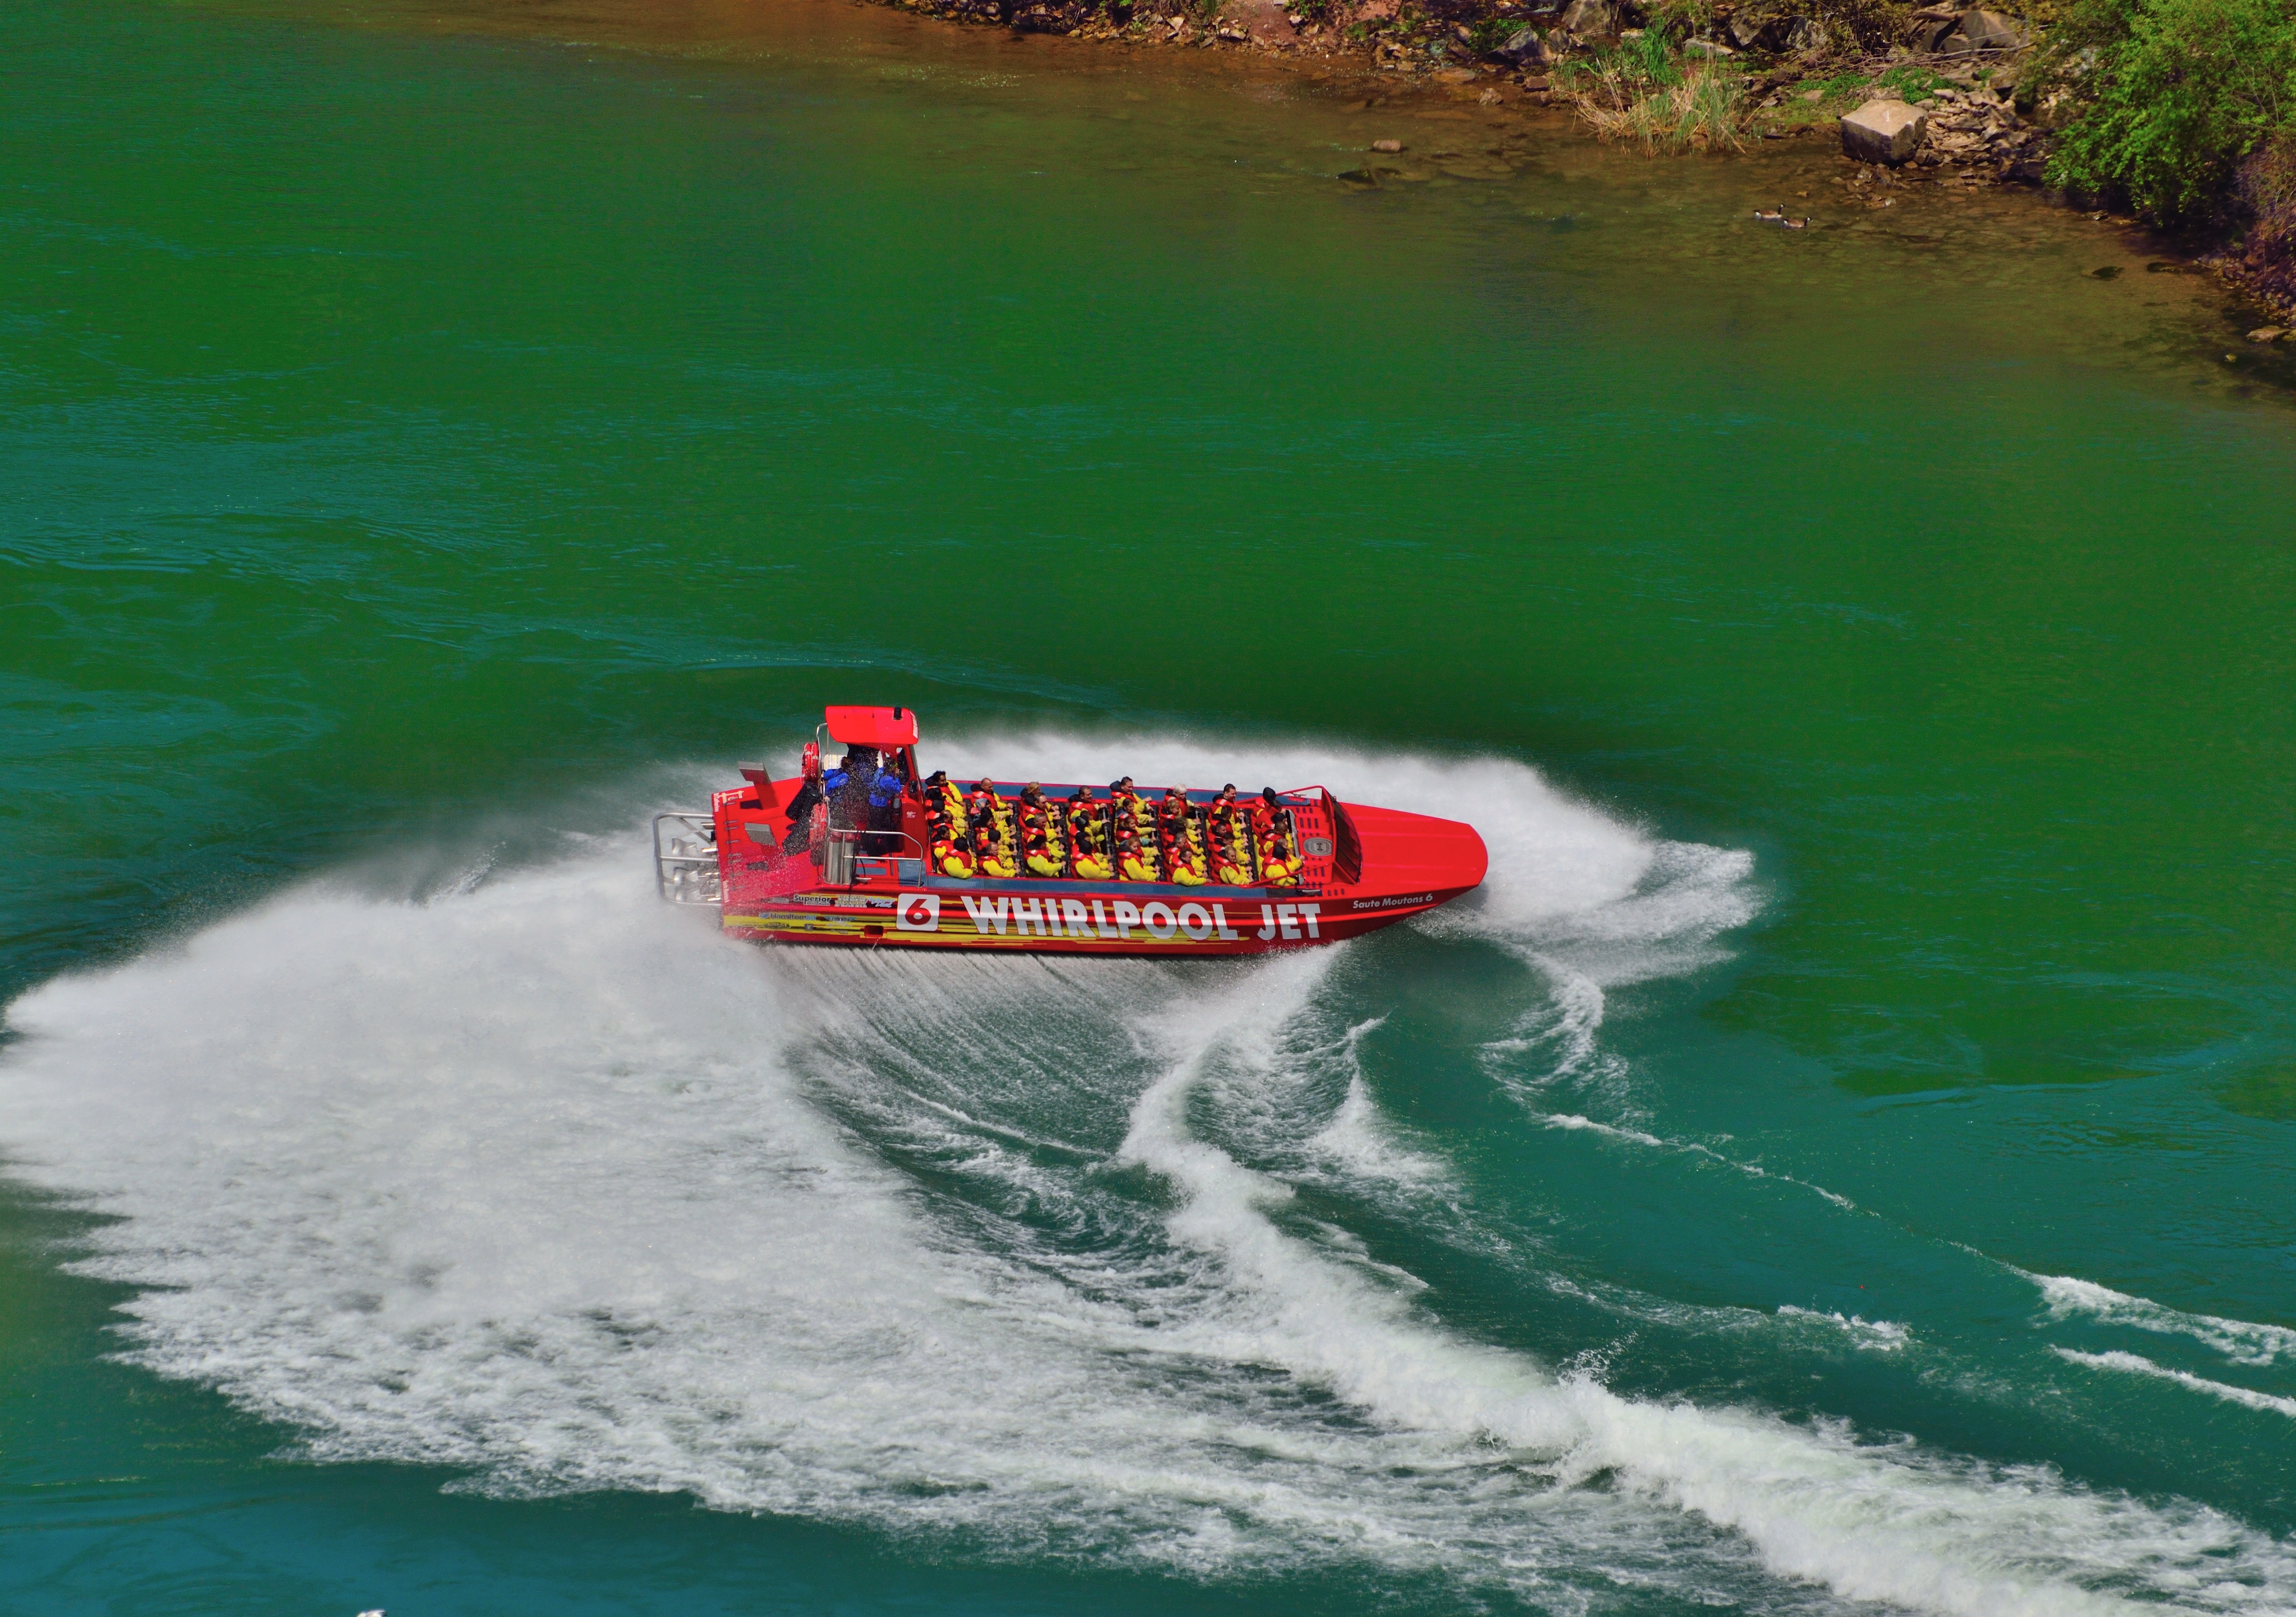 red and yellow whirlpool jet